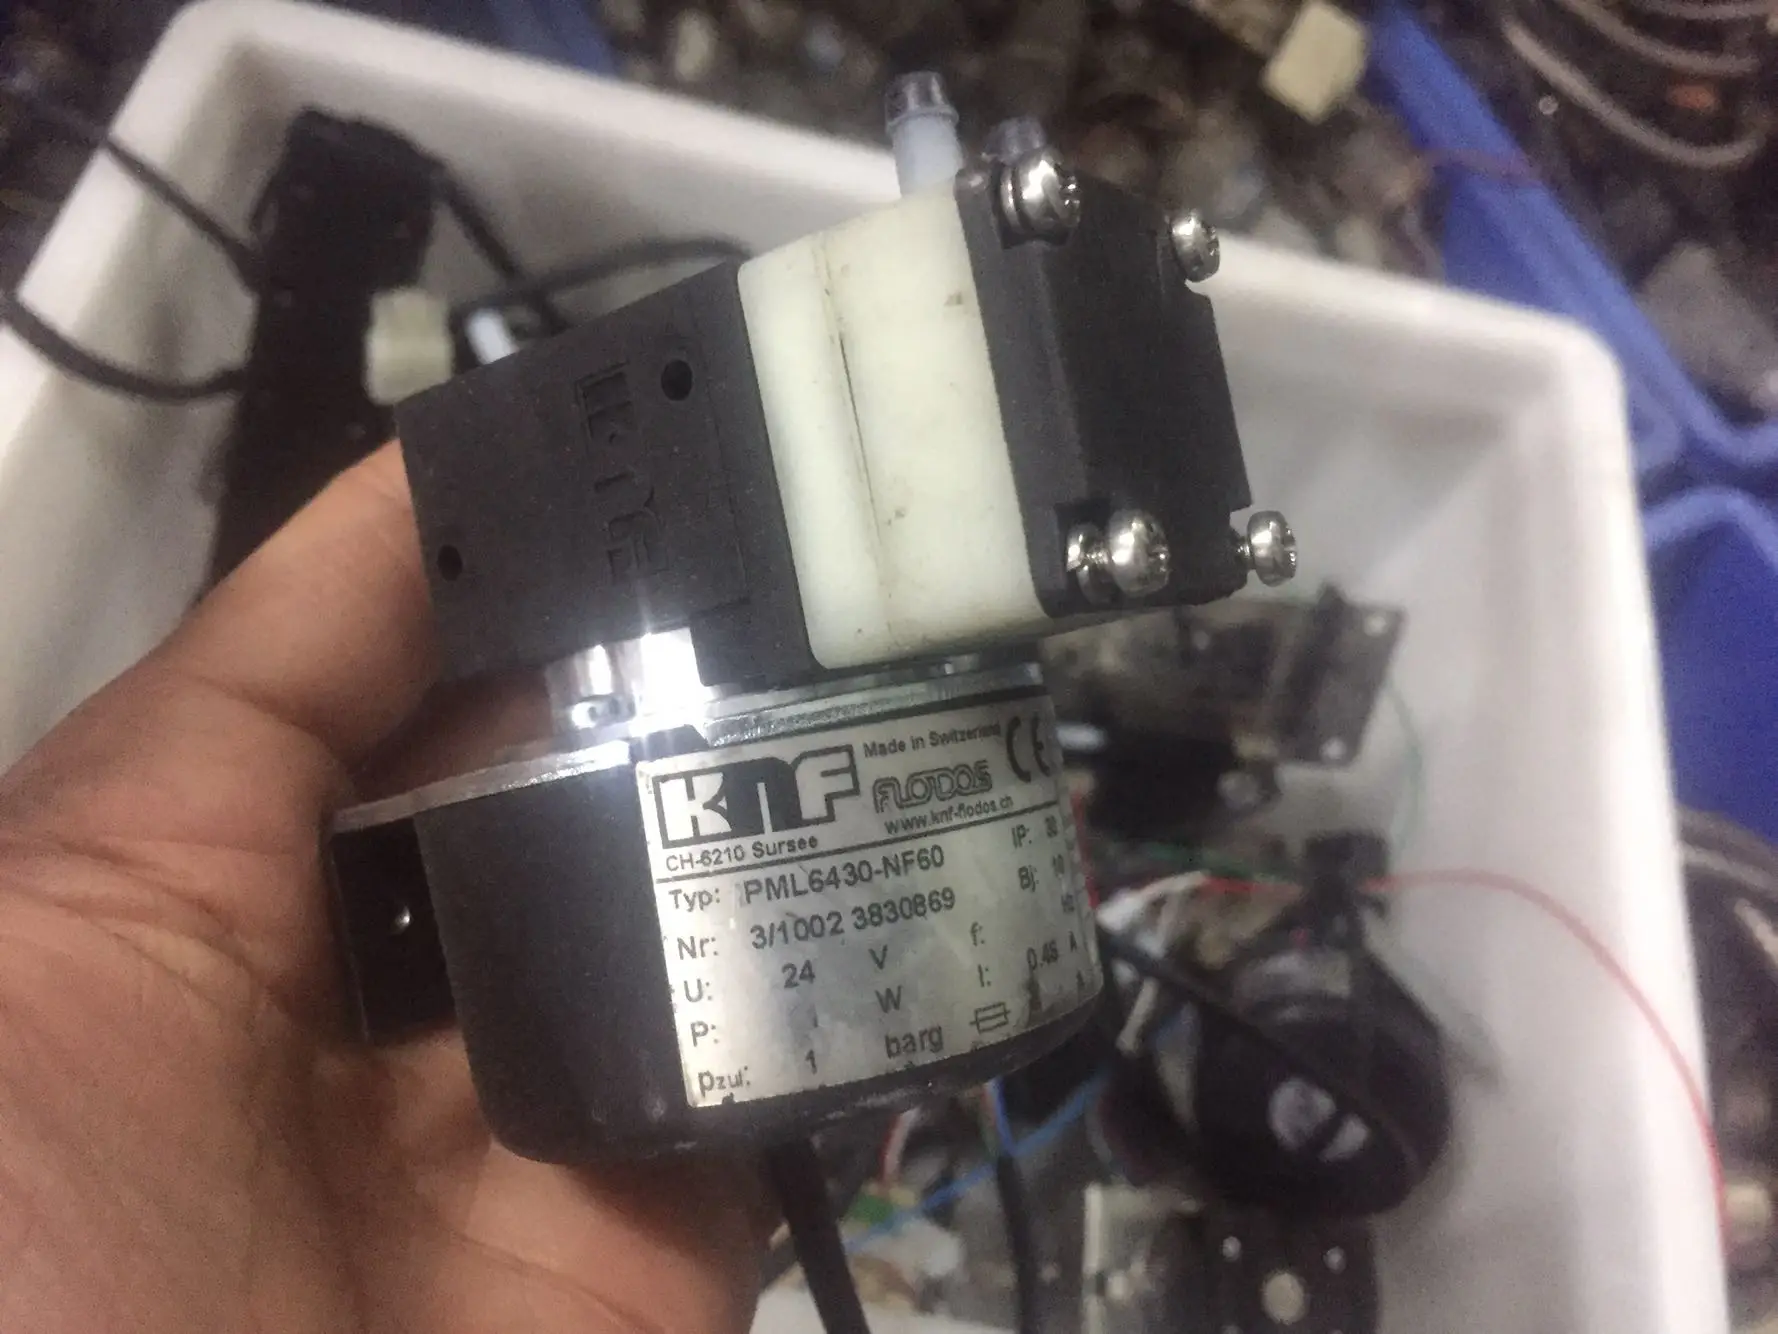 

FOR Used Disassemble Import KNF PML430-N60 Liquid Pump 24V 11W